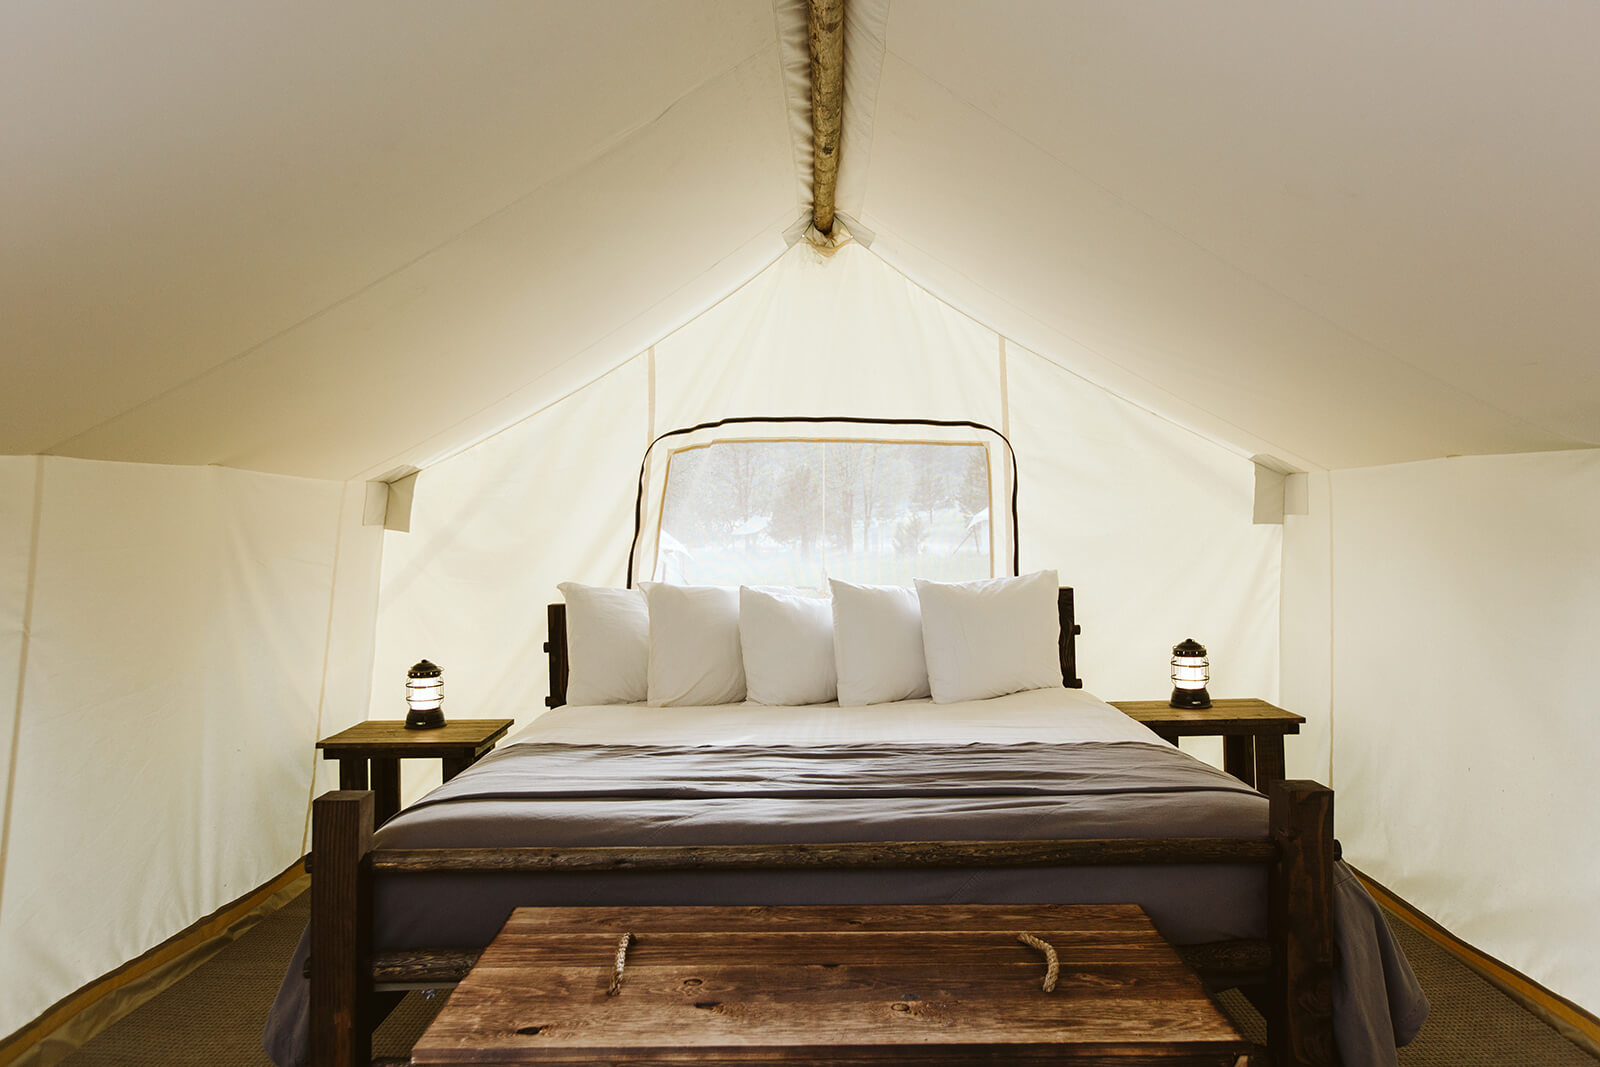 Under Canvas bed at rushmore